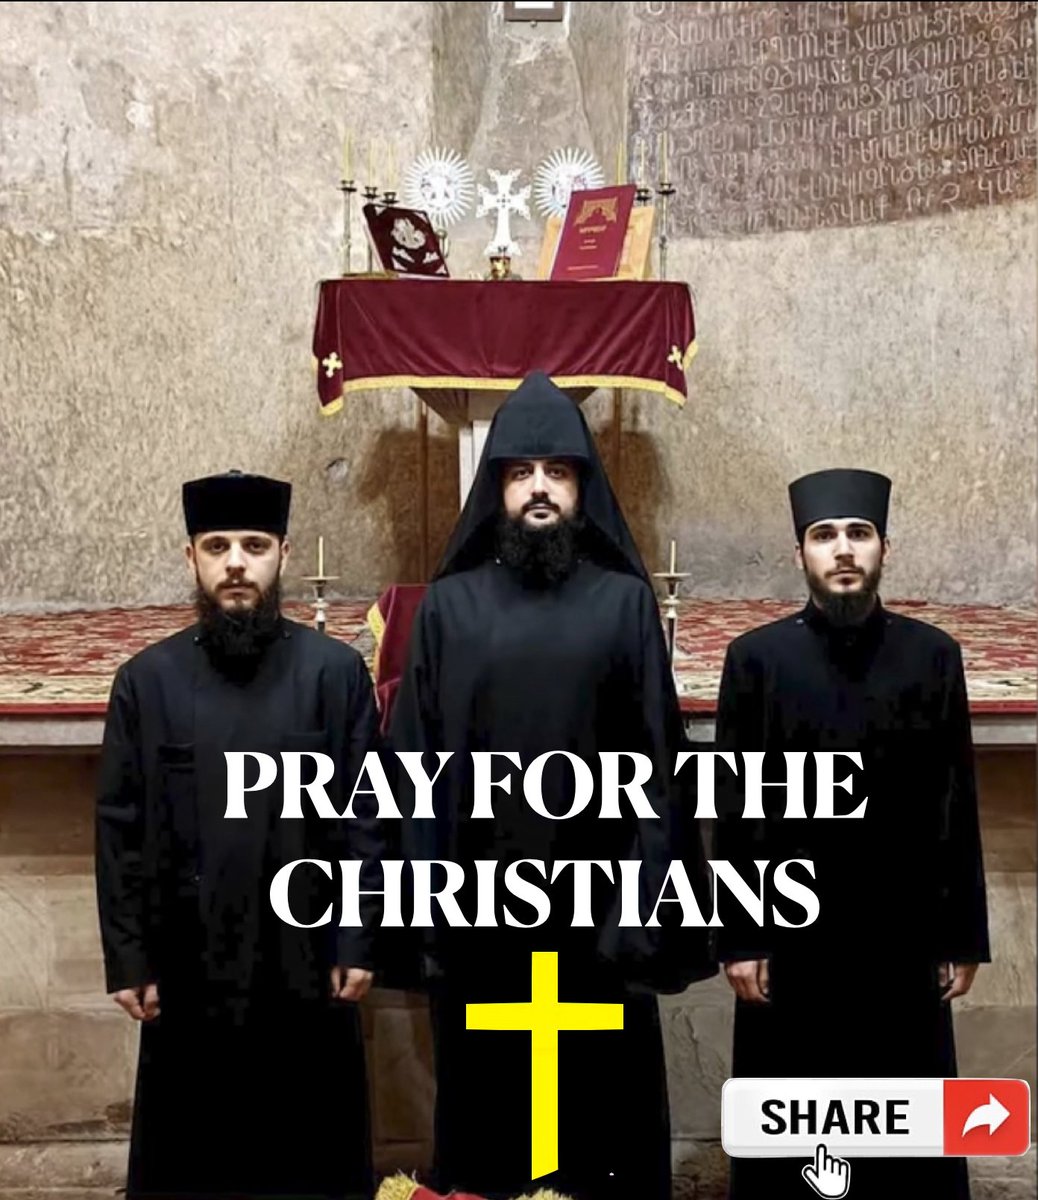 The last photo of the final clergy of Dadivank. They arrived in Armenia on Oct. 1, 2023, marking the first instance in 1722 years when no Christian prayer is heard in Artsakh / Nagorno-Karabakh. Before departing the sacred monastery, they prayed for its return. Now, the